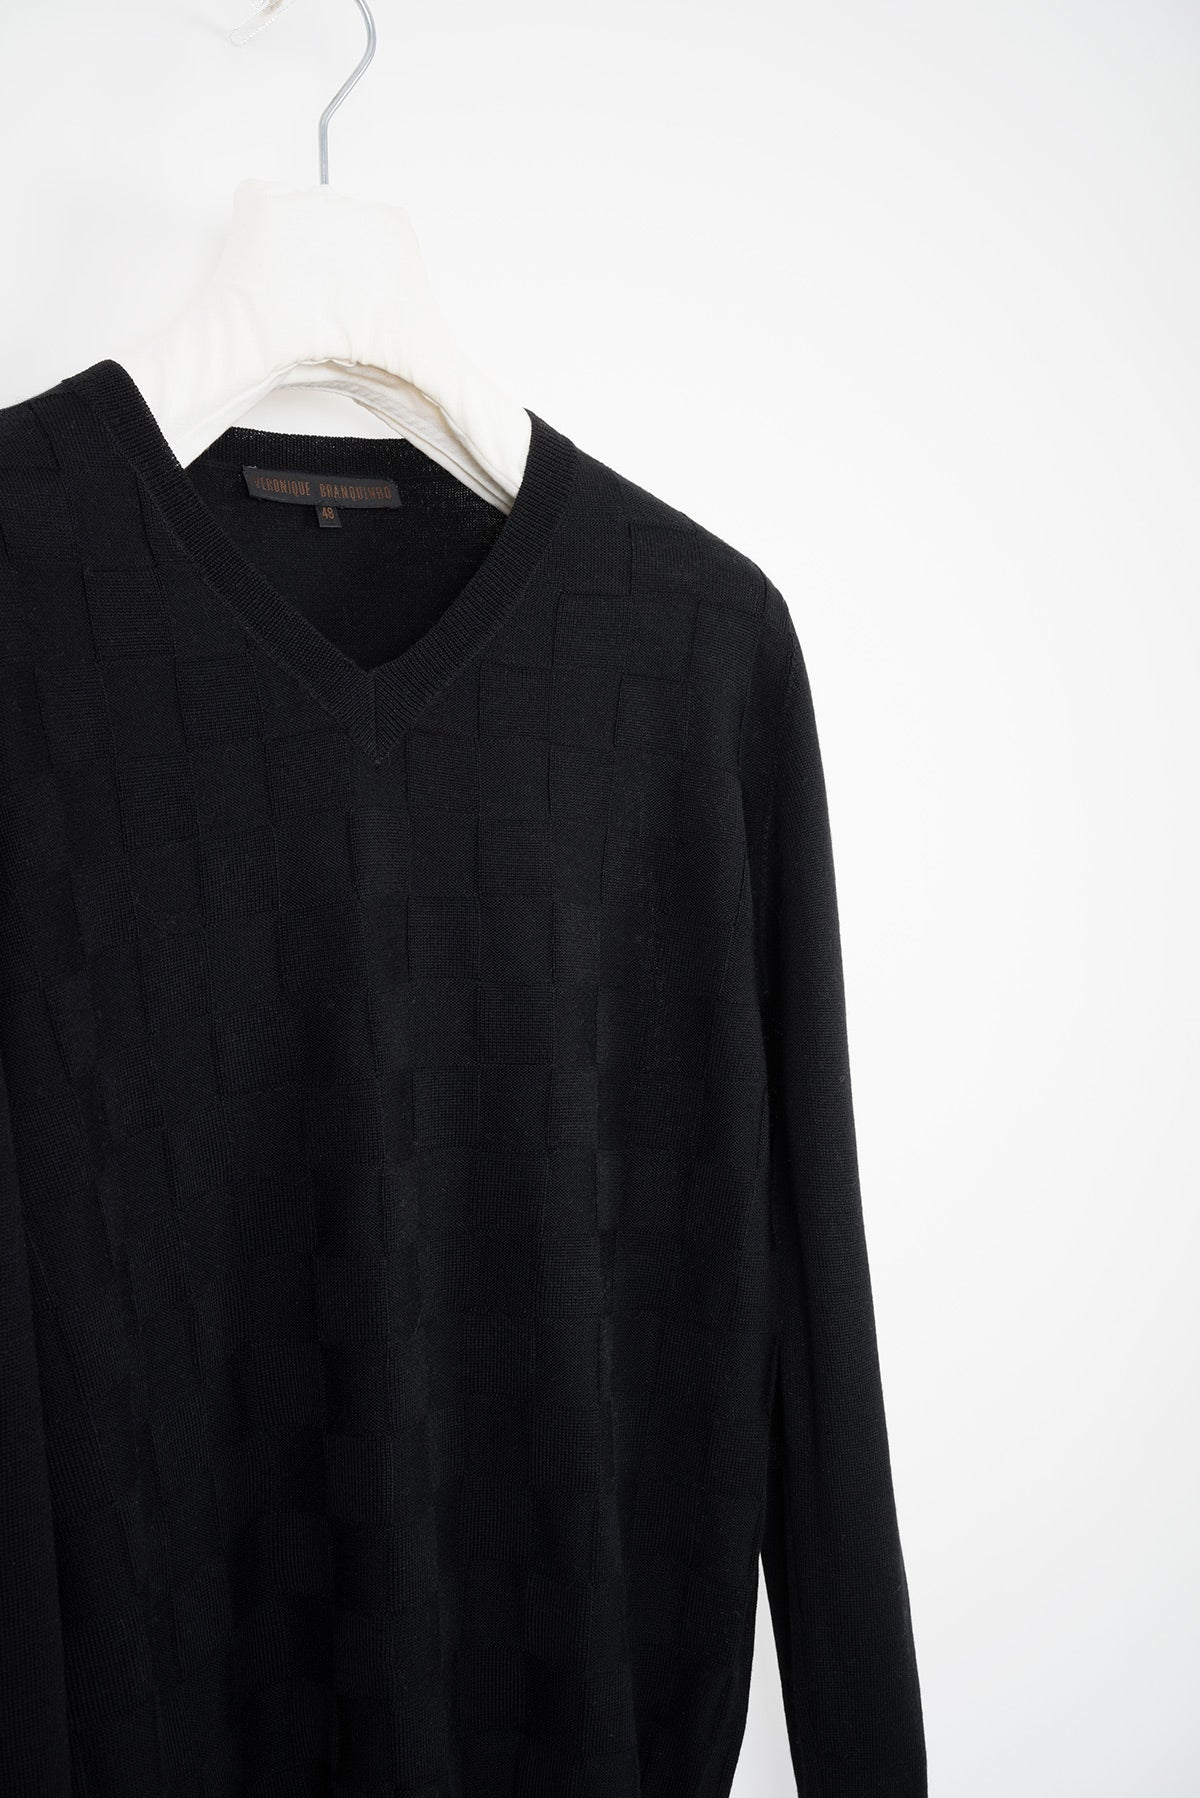 2008 A/W "CHESS" V-NECK SWEATER IN BLACK FINEST WOOL